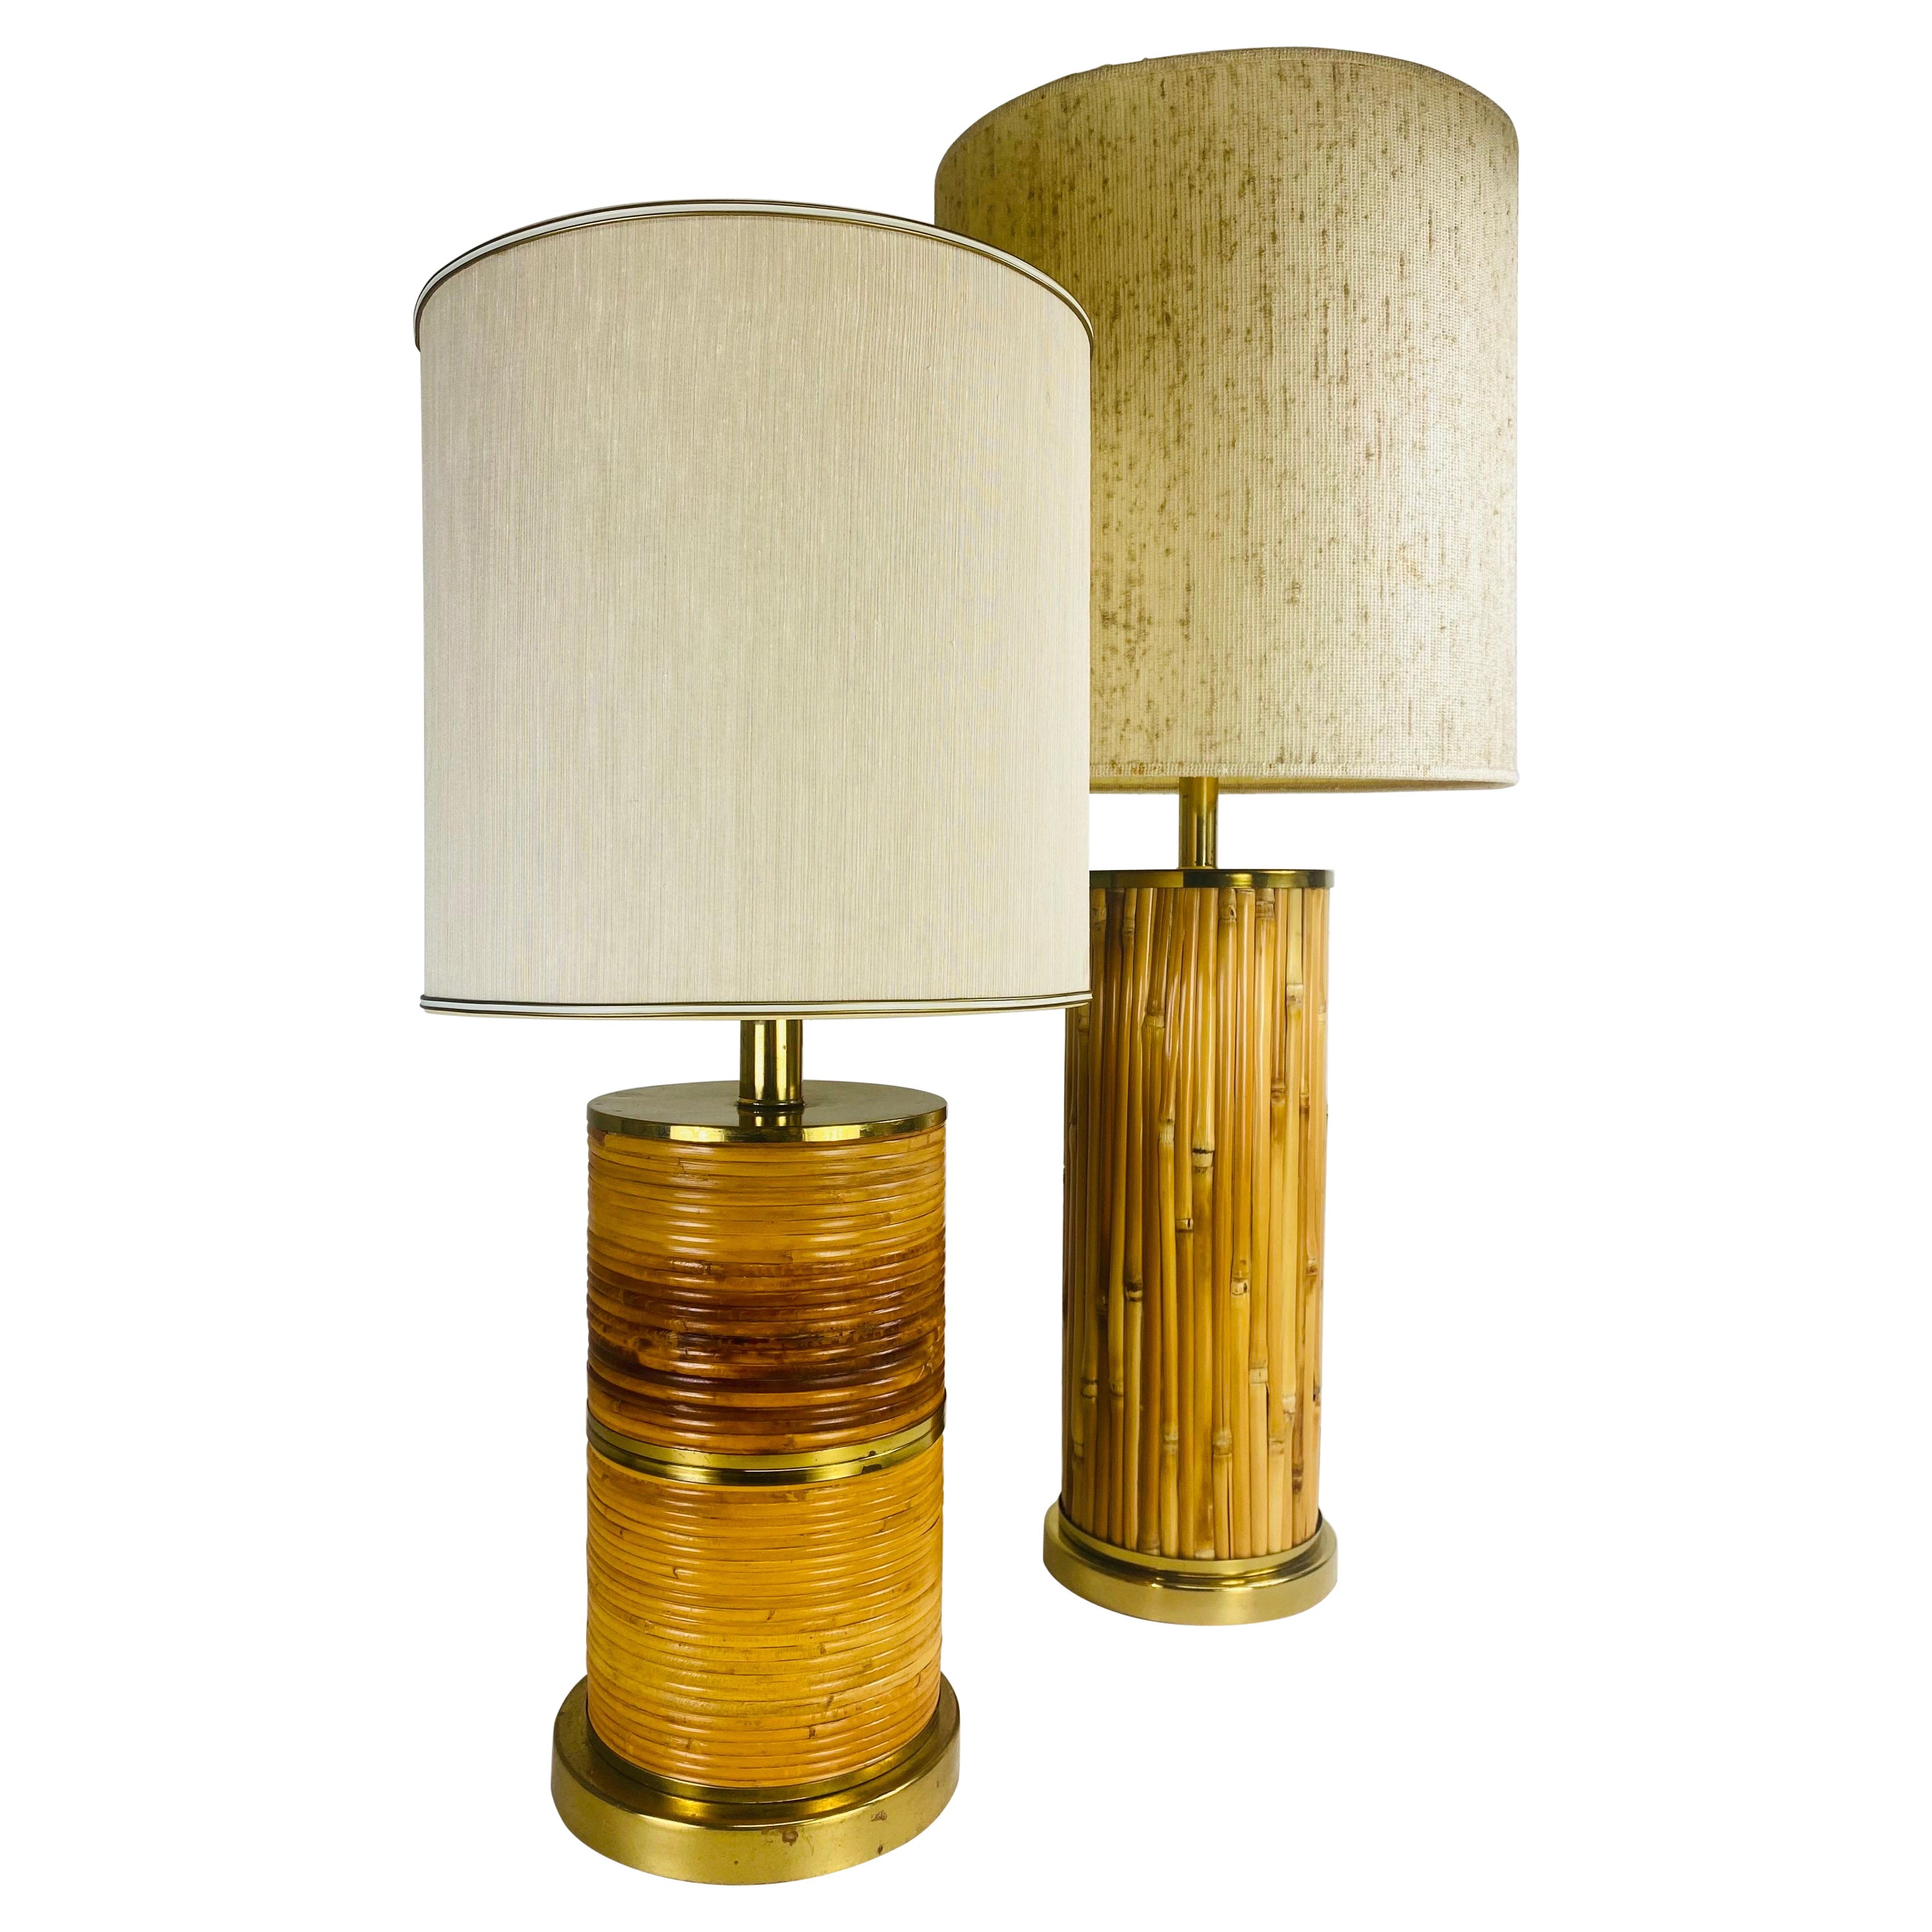 Mid century vintage complementary pair of coastal bamboo table lamps